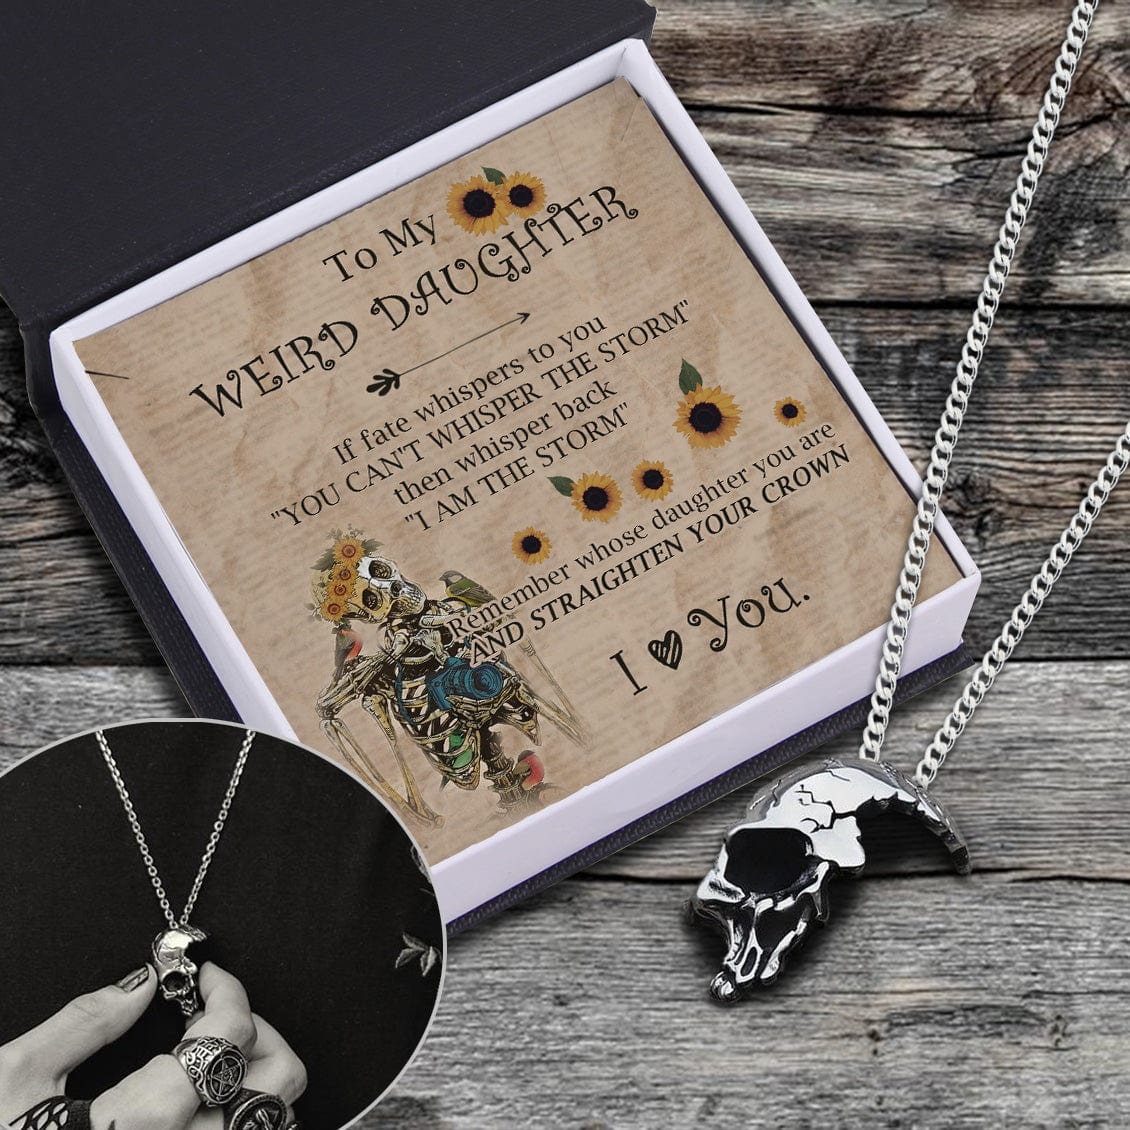 Matching Double Skeleton Pinky Swear Necklace Set - Veeaien Designs